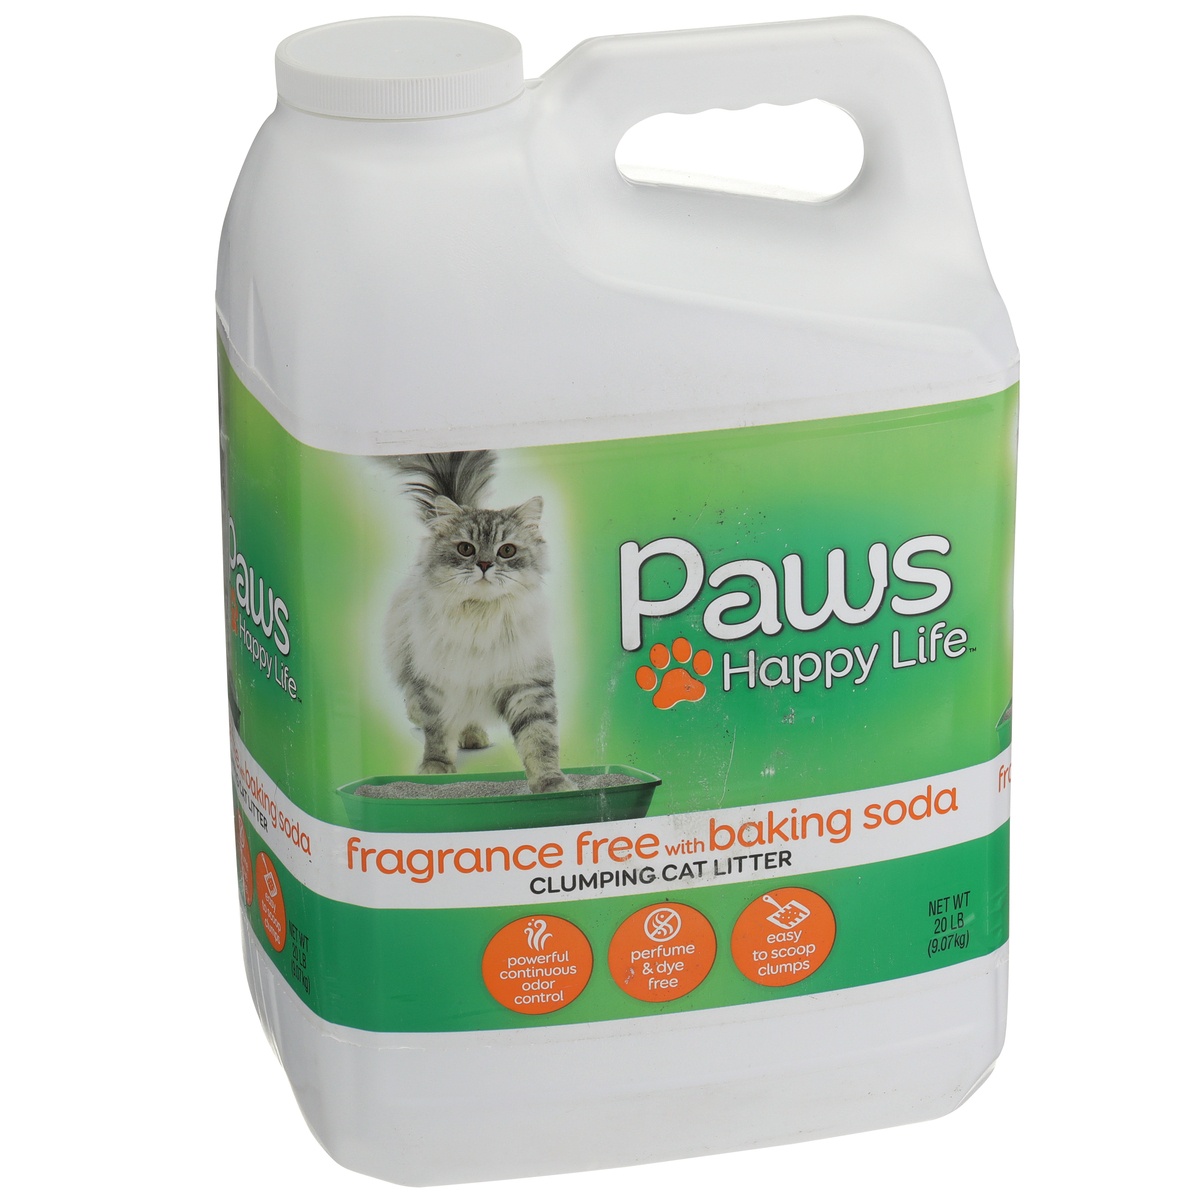 slide 2 of 8, Paws Happy Life Fragrance Free With Baking Soda Clumping Cat Litter, 20 lb